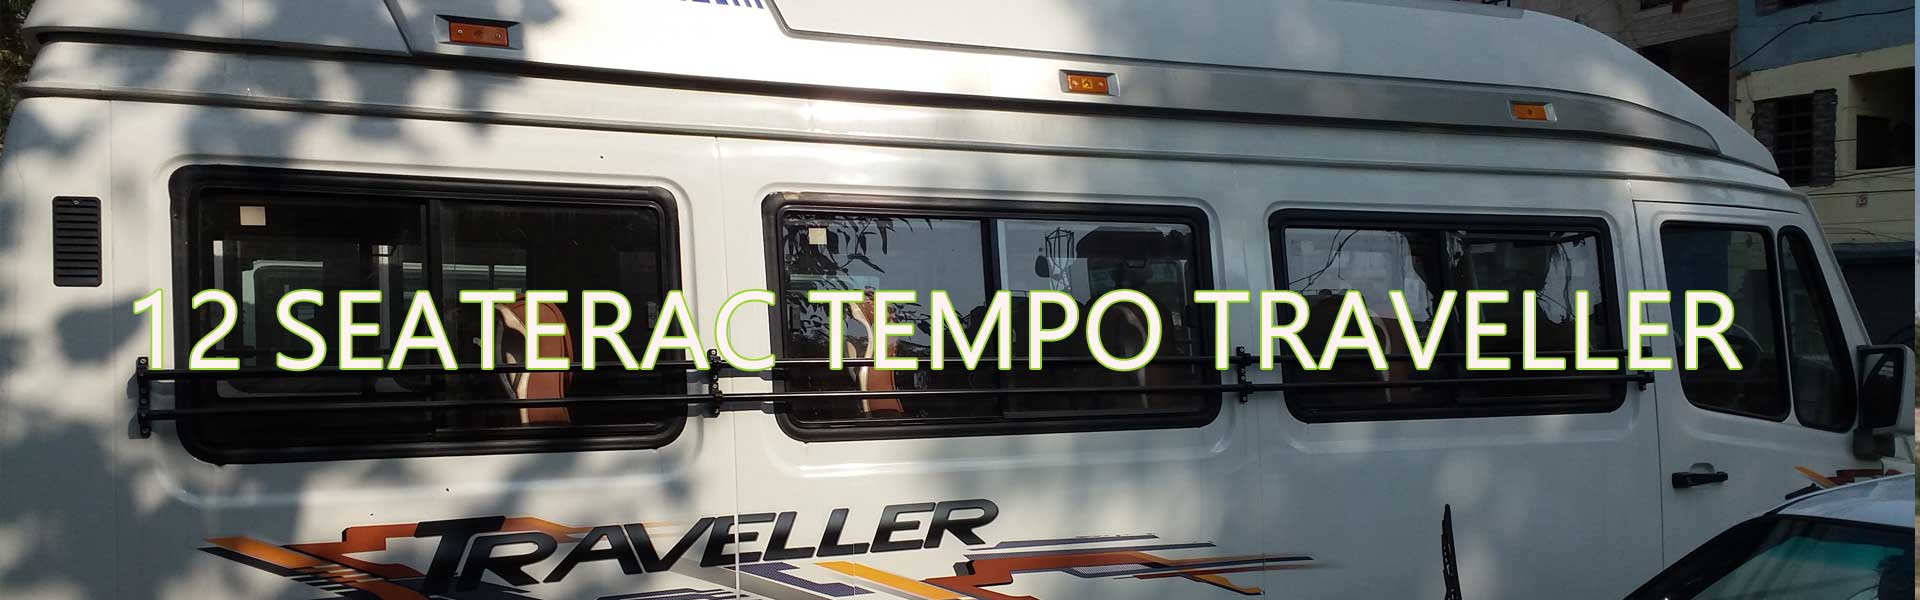 ac tempo traveller hire in pune